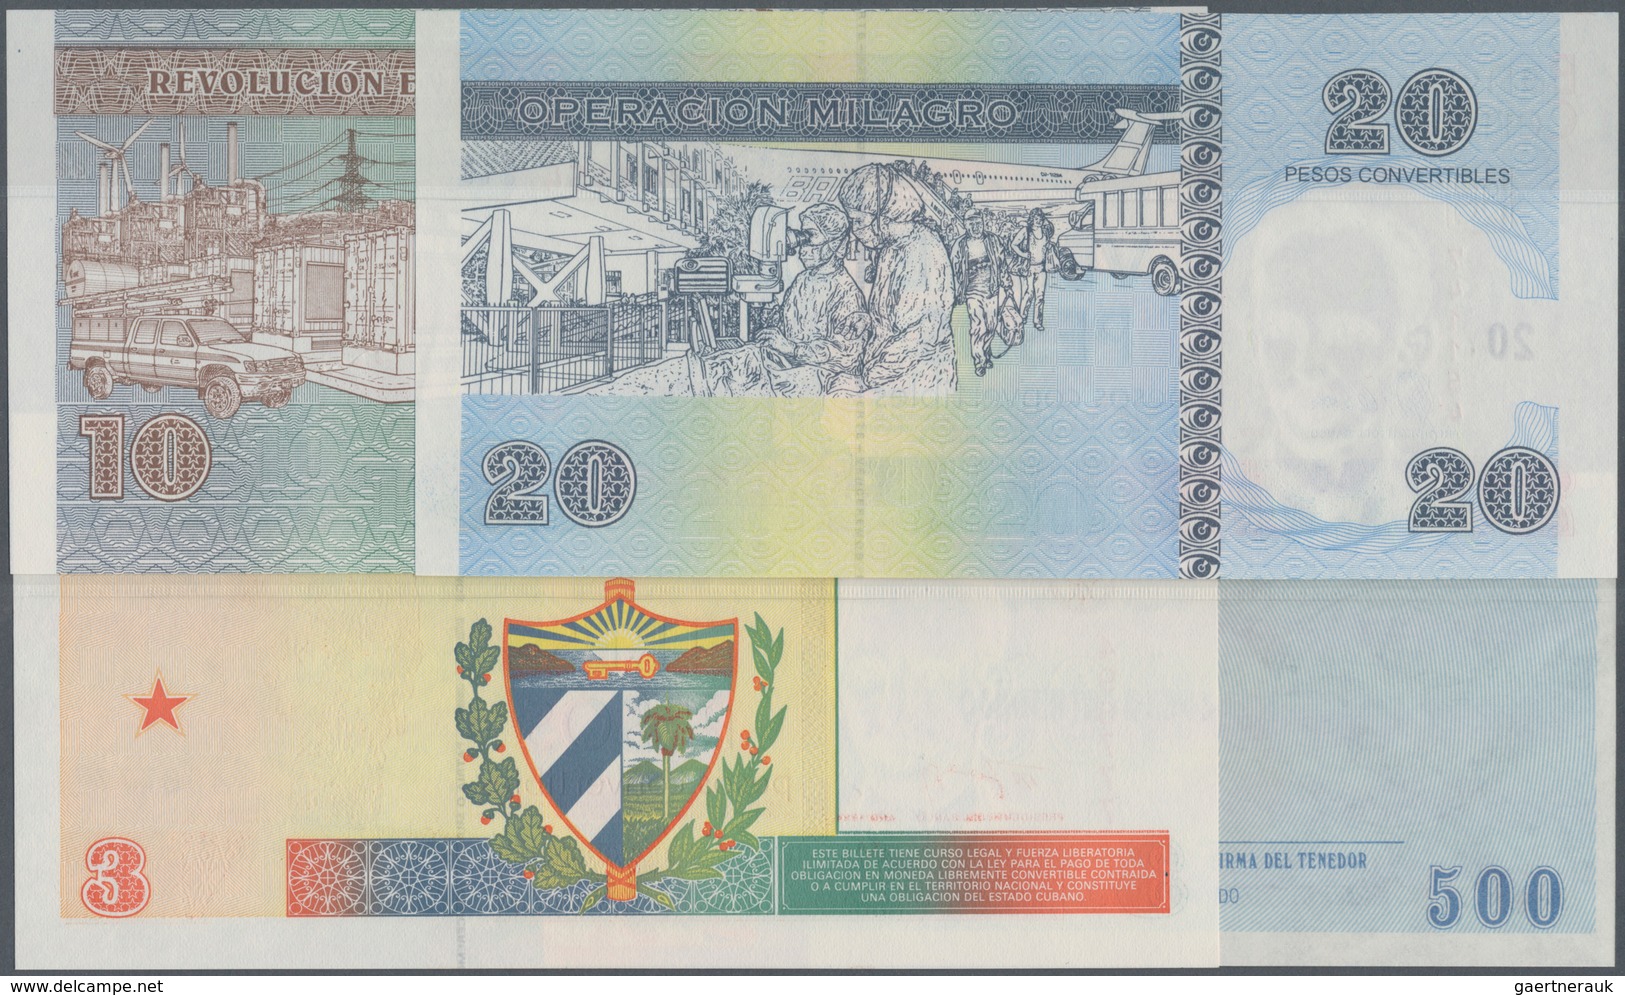 Cuba: Huge Lot With 38 Banknotes Of The Foreign Exchange Certificates Series 1 - 500 Pesos ND(1985)- - Kuba